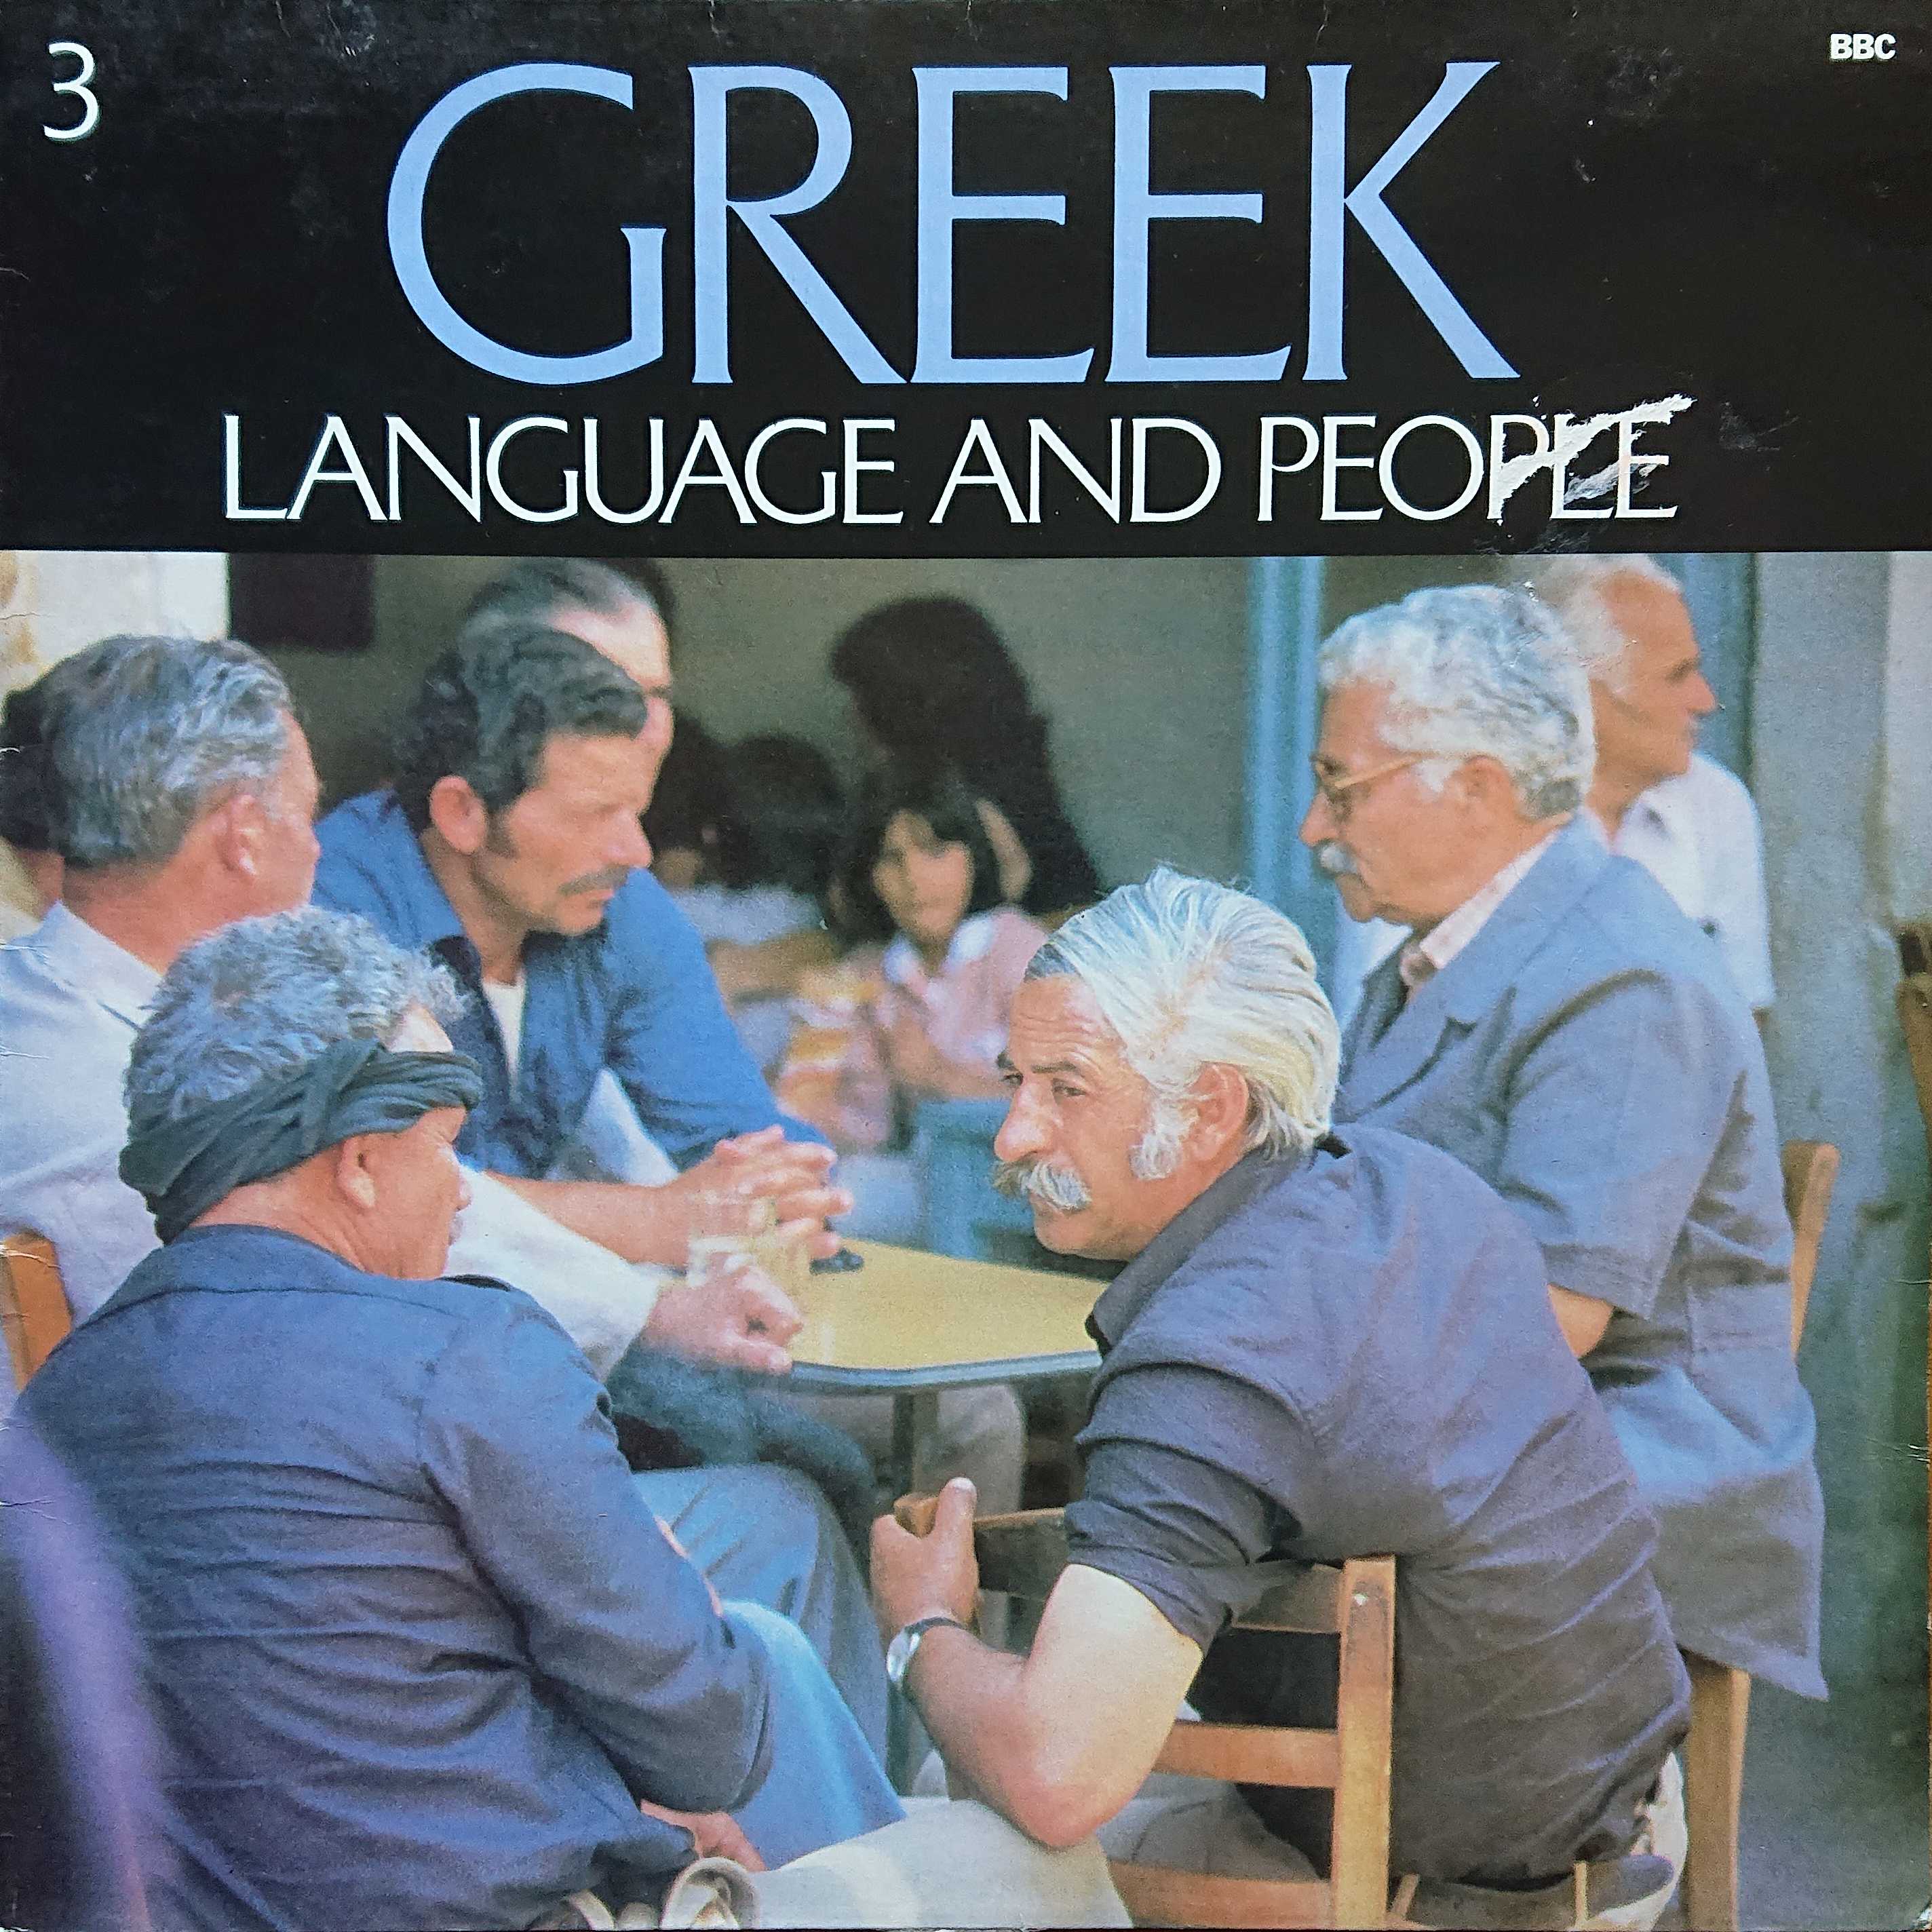 Picture of OP 271 Greek language and people by artist David A. Hardy from the BBC albums - Records and Tapes library